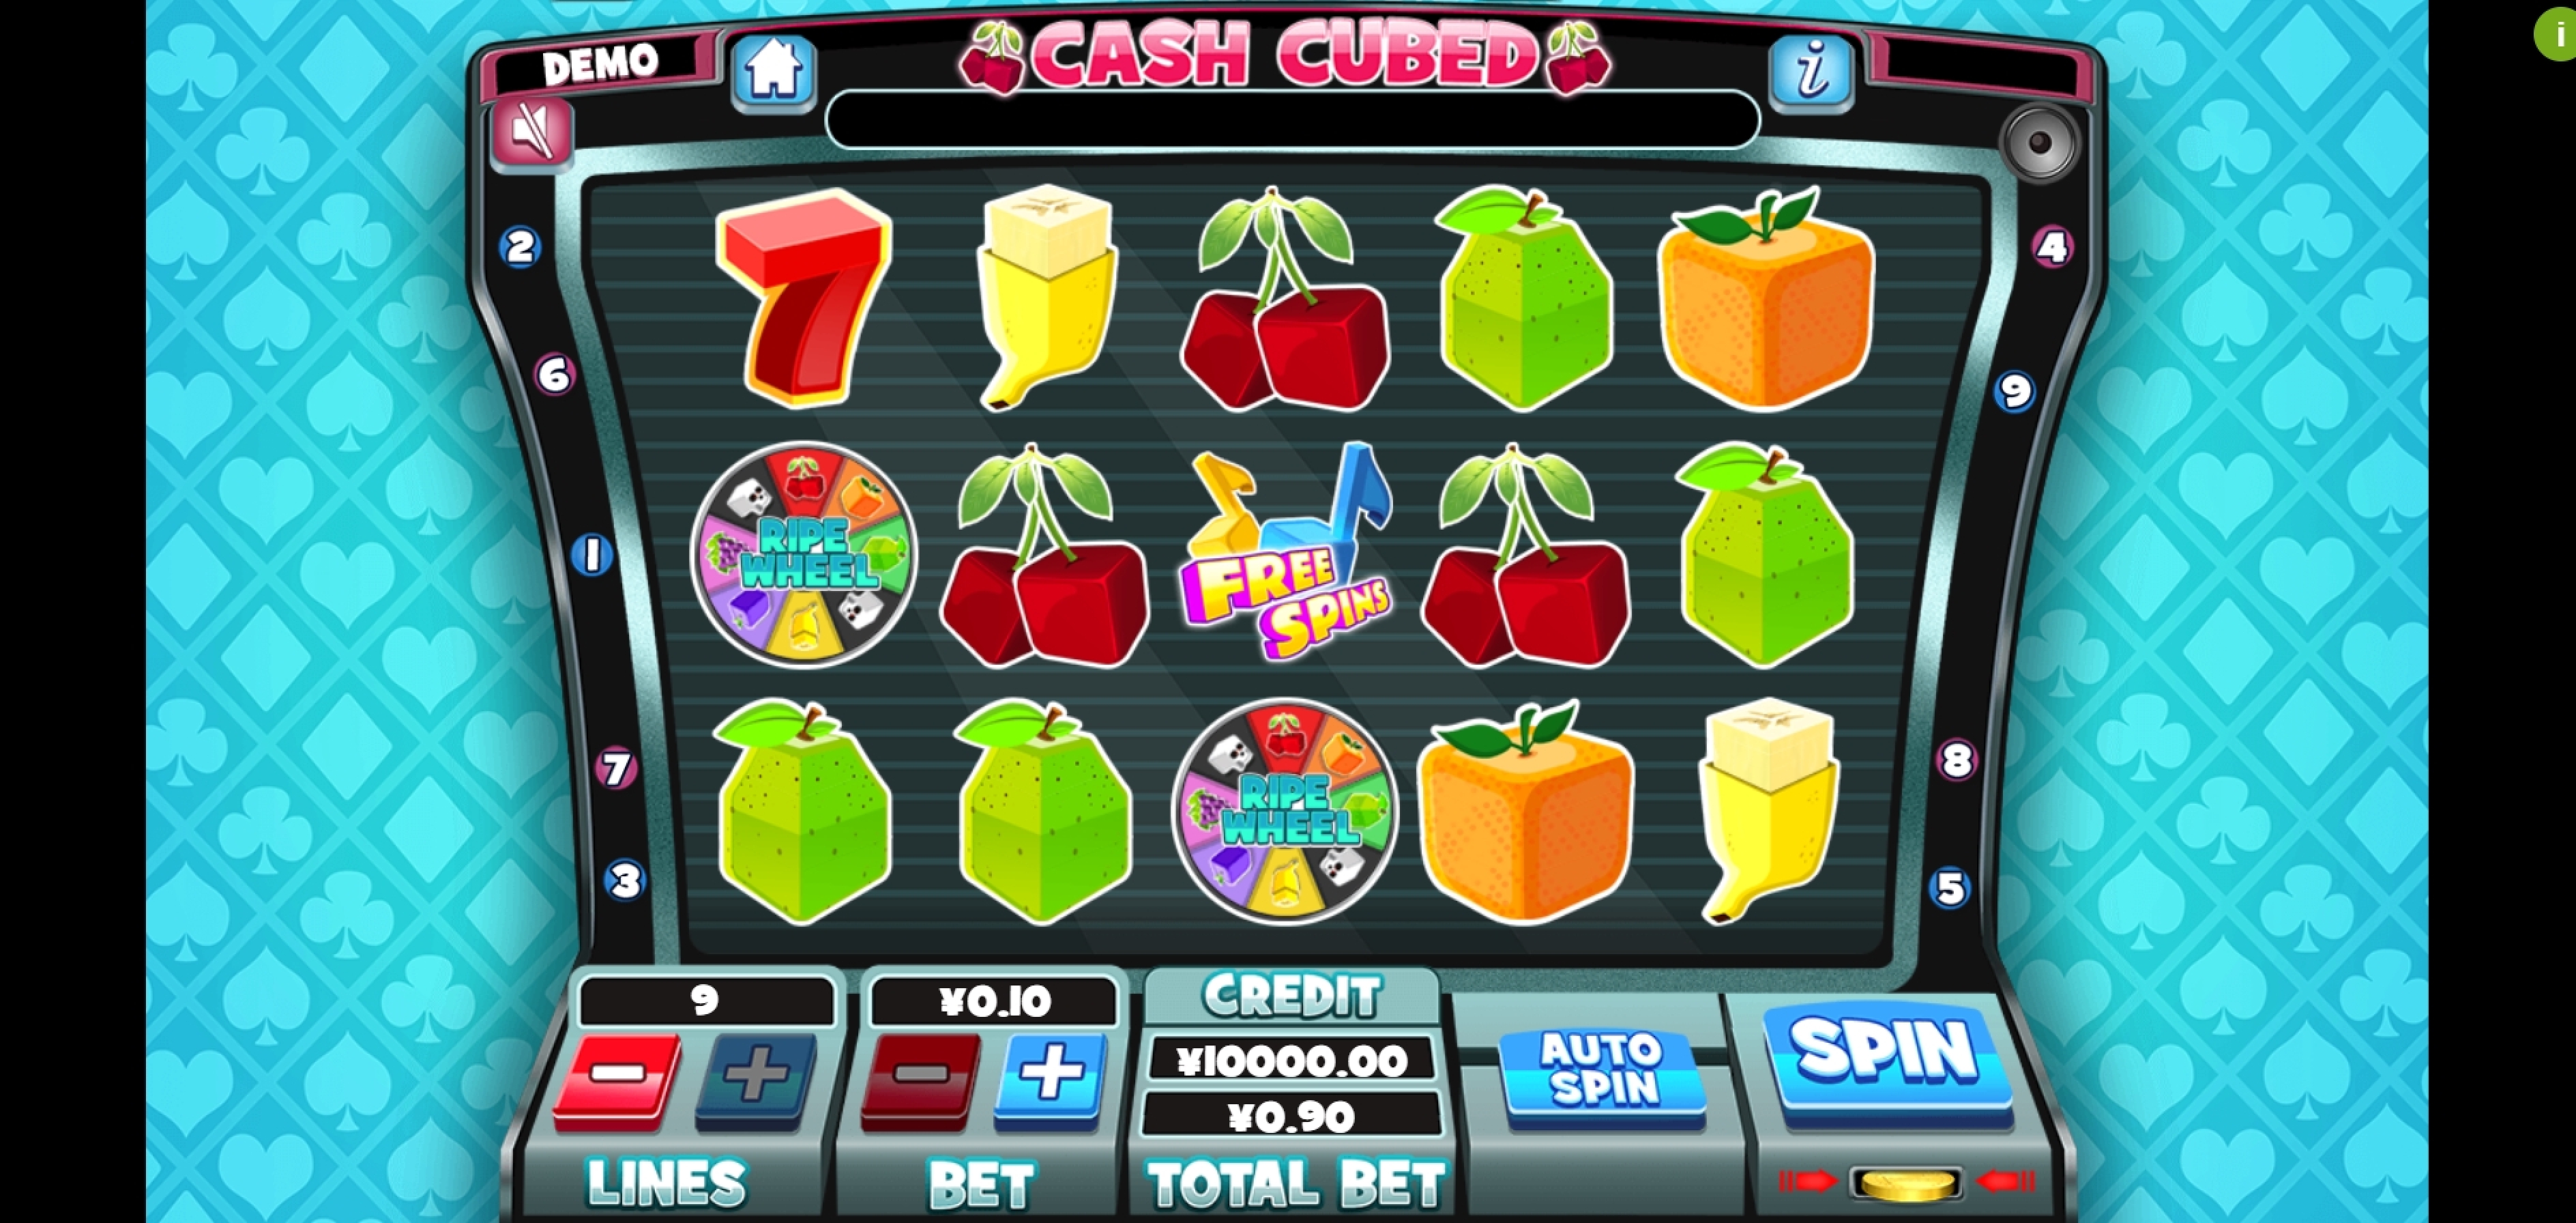 Reels in Cash Cubed Slot Game by Slot Factory